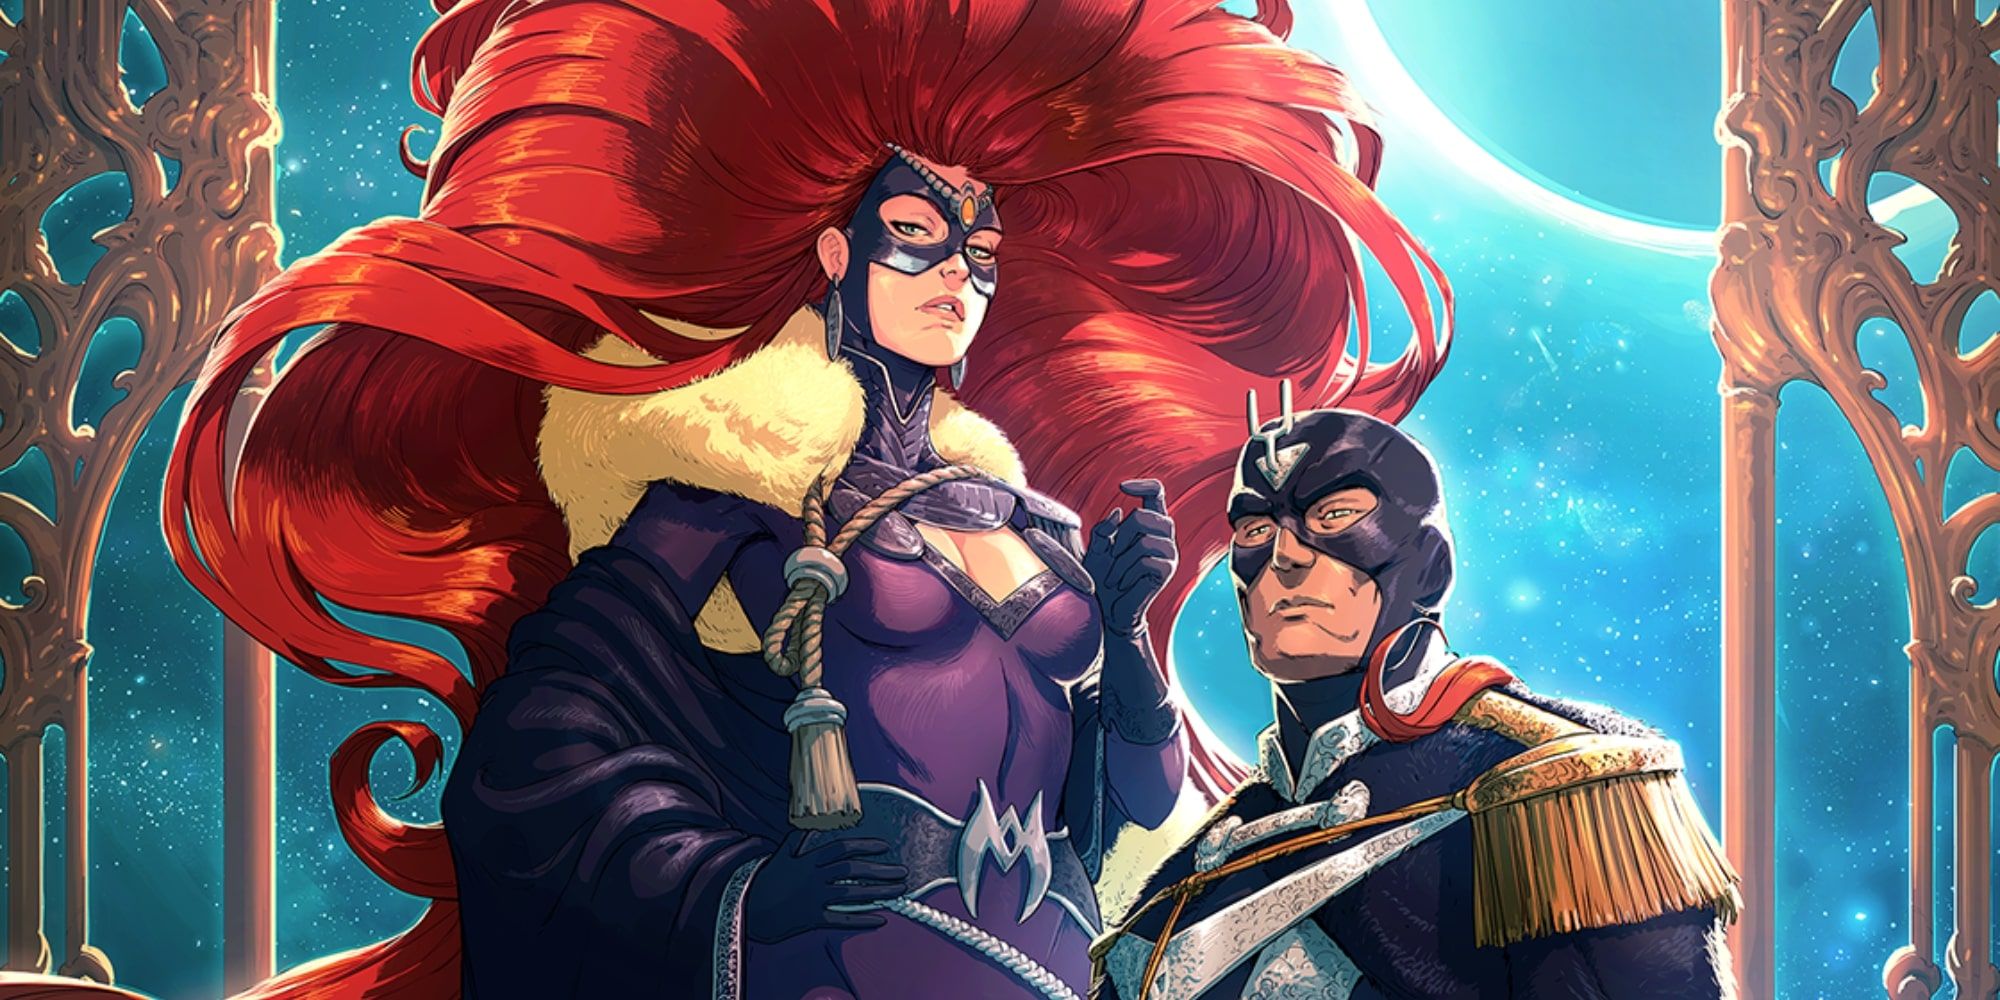 image-of-King-of-Inhumans-Black-Bolt-(Blackagar-Boltagon)-and-Queen-Medusa-with-red-hair-1